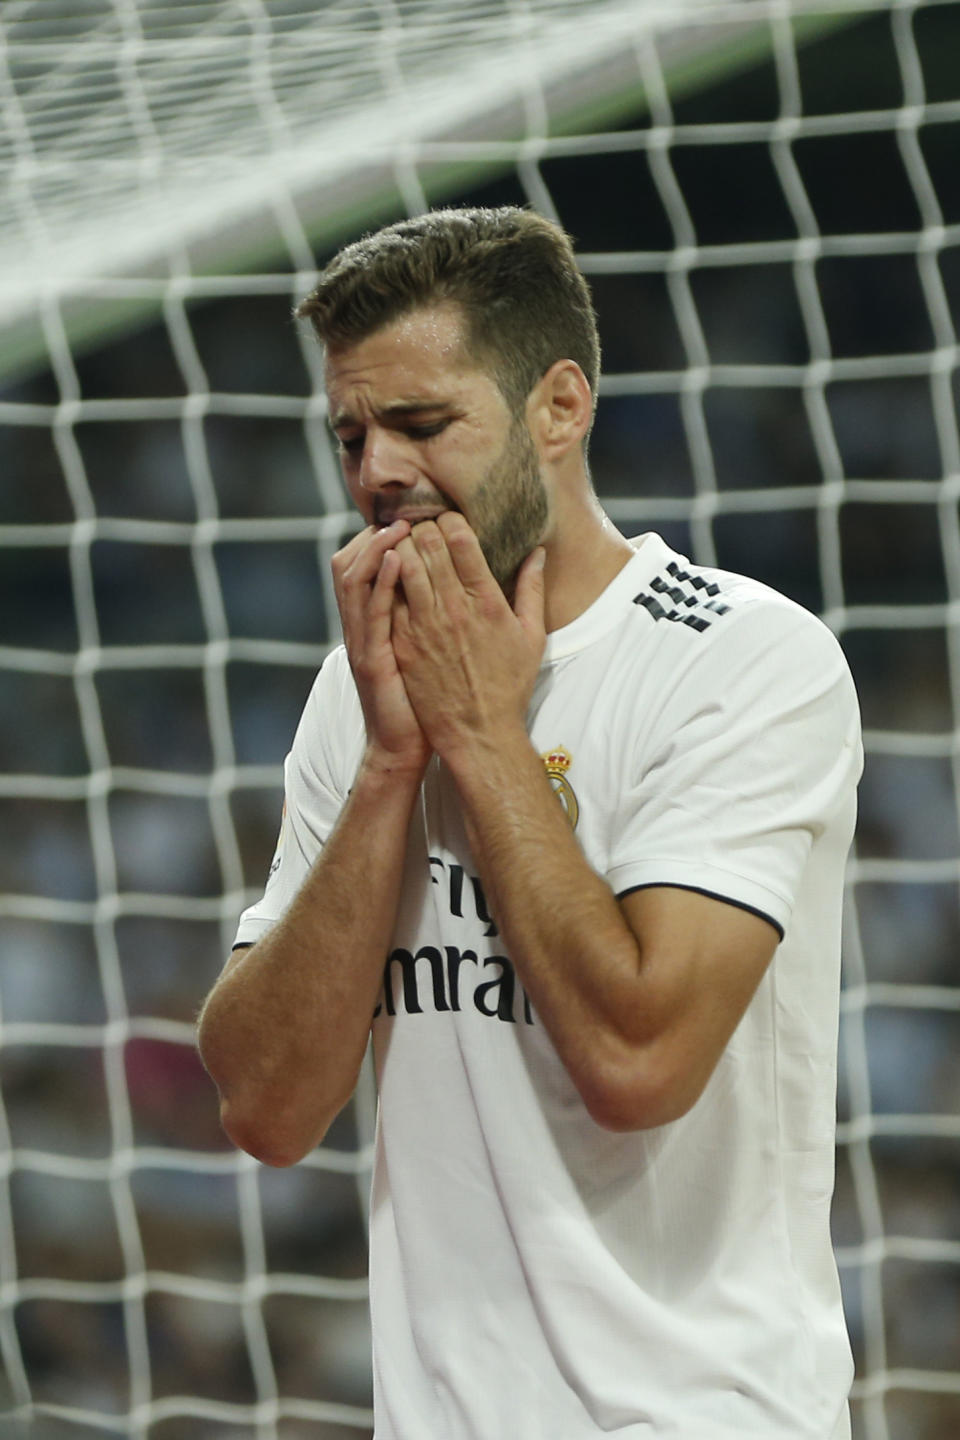 Real Madrid's Nacho Fernandez gestures during a Spanish La Liga soccer match between Real Madrid and Atletico Madrid at the Santiago Bernabeu stadium in Madrid, Spain, Saturday, Sept. 29, 2018. The match ended in a 0-0 draw. (AP Photo/Paul White)